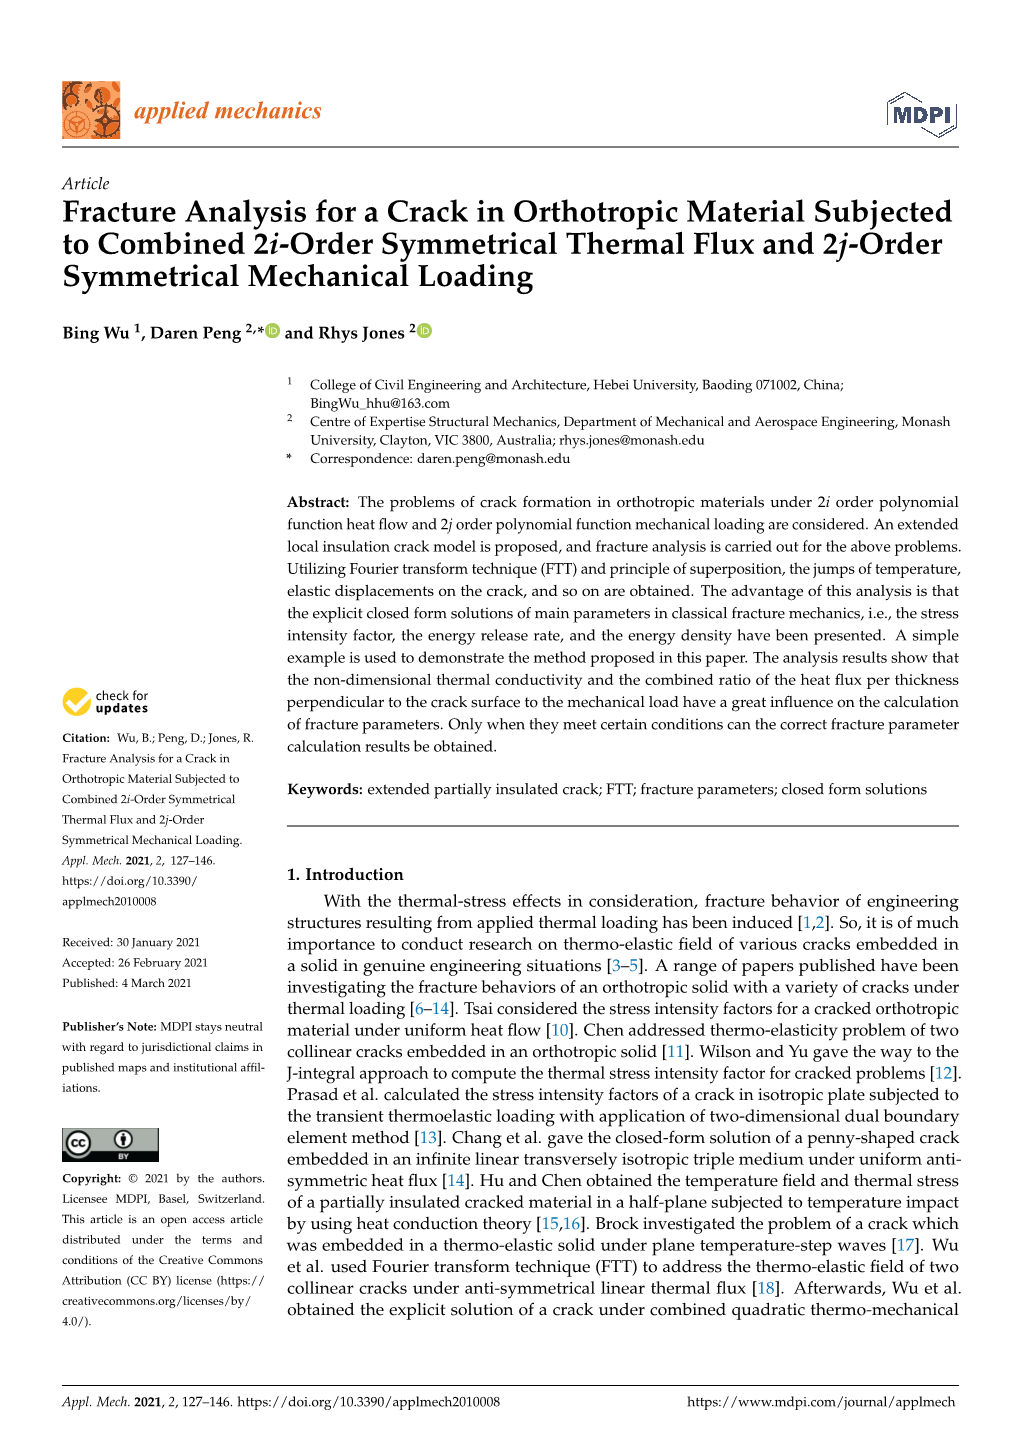 Fracture Analysis for a Crack in Orthotropic Material Subjected to Combined 2I-Order Symmetrical Thermal Flux and 2J-Order Symmetrical Mechanical Loading